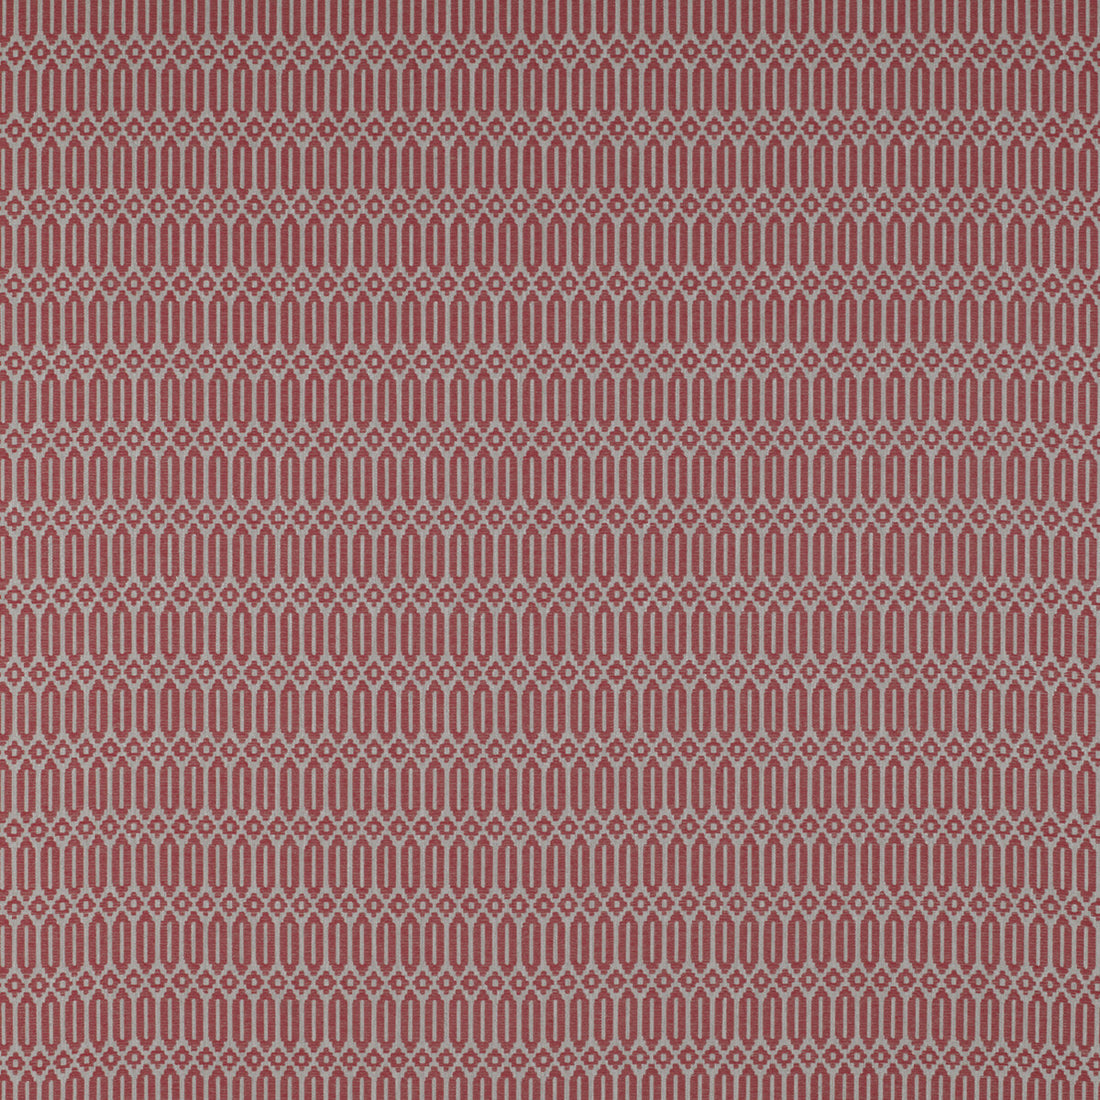 Varese fabric in rojo color - pattern GDT5321.004.0 - by Gaston y Daniela in the Tierras collection